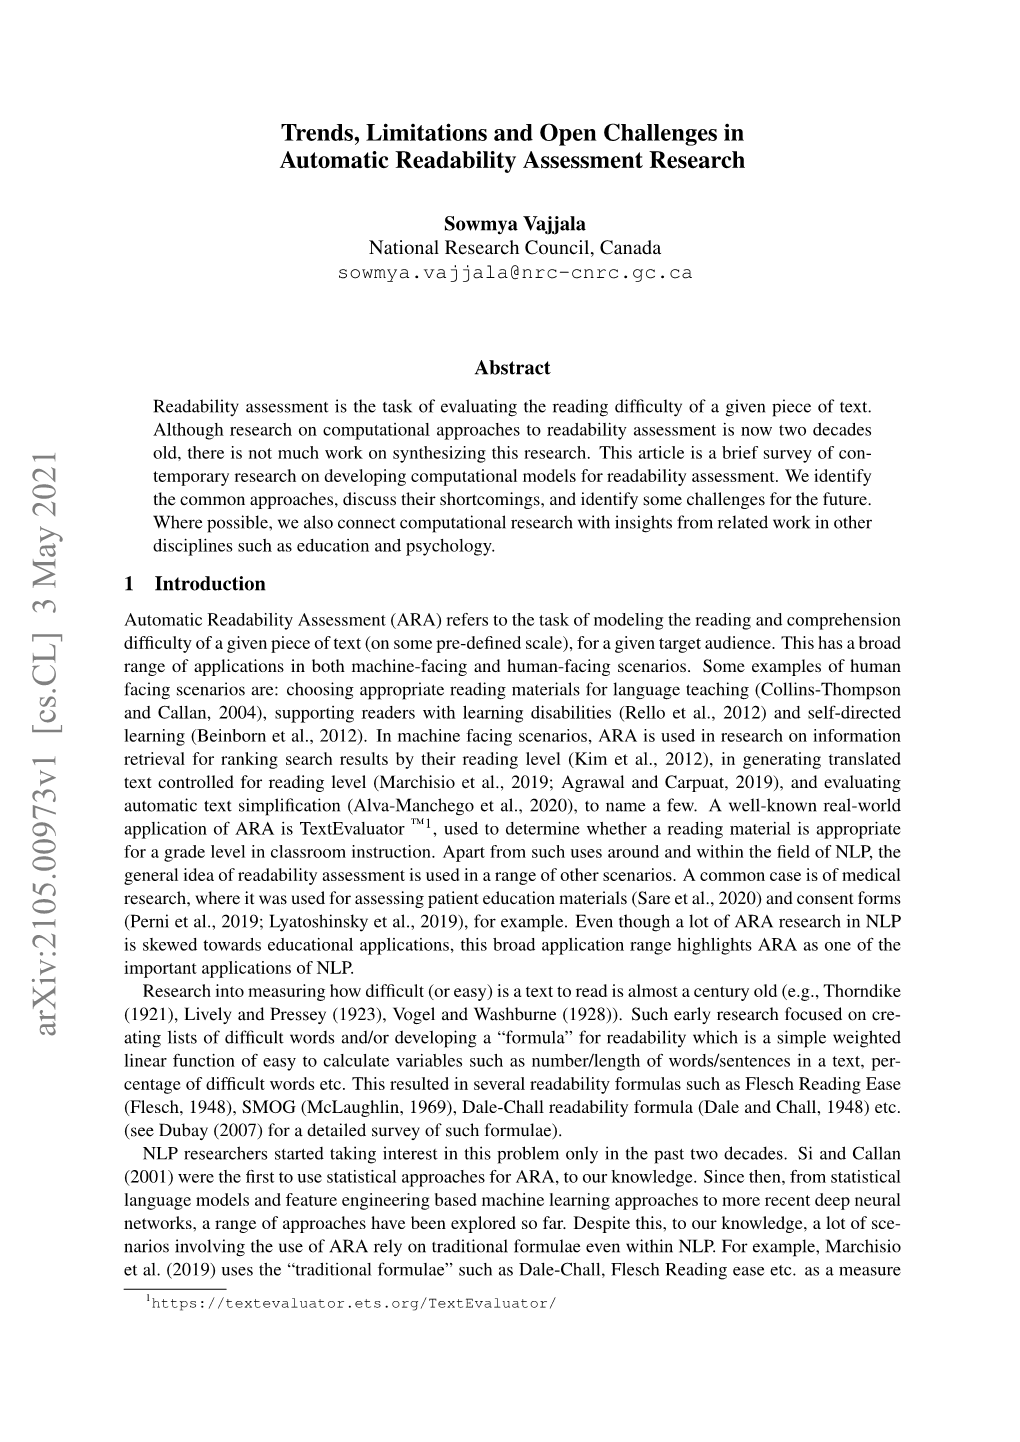 Trends, Limitations and Open Challenges in Automatic Readability Assessment Research